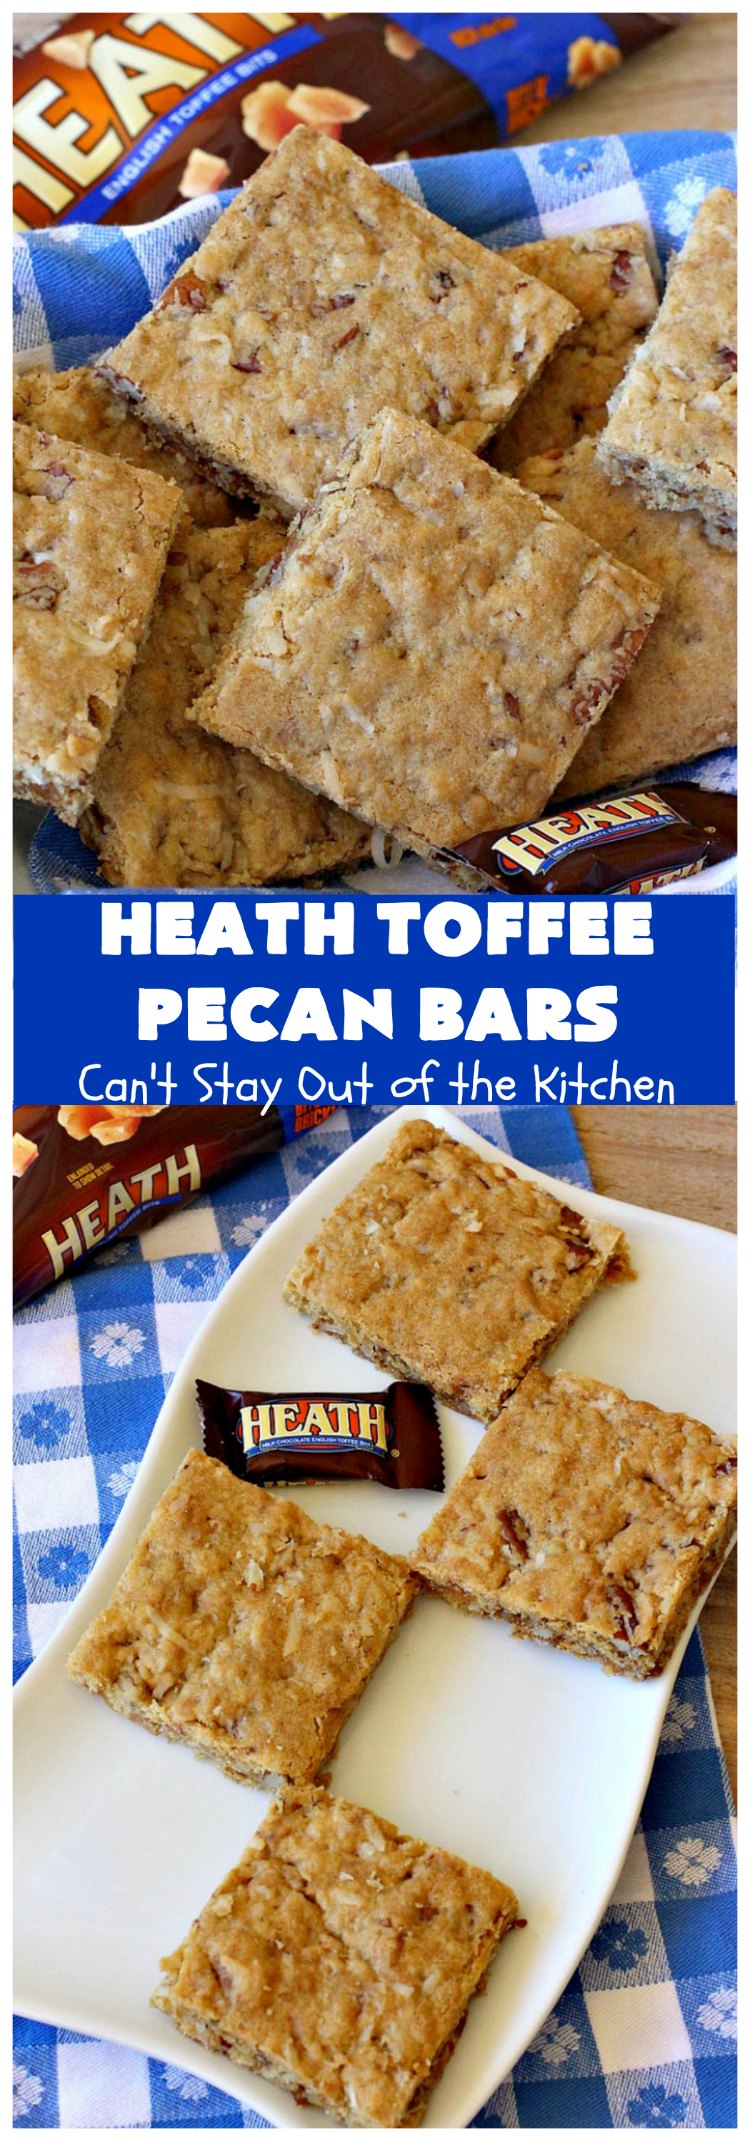 Heath Toffee Pecan Bars | Can't Stay Out of the Kitchen | these #cookies simply explode with flavor & crunchiness by using #HeathEnglishToffeeBits & #pecans. #tailgating #dessert #HeathToffeeBitsDessert #ToffeeDessert #HeathToffeePecanBars #holiday #HolidayDessert